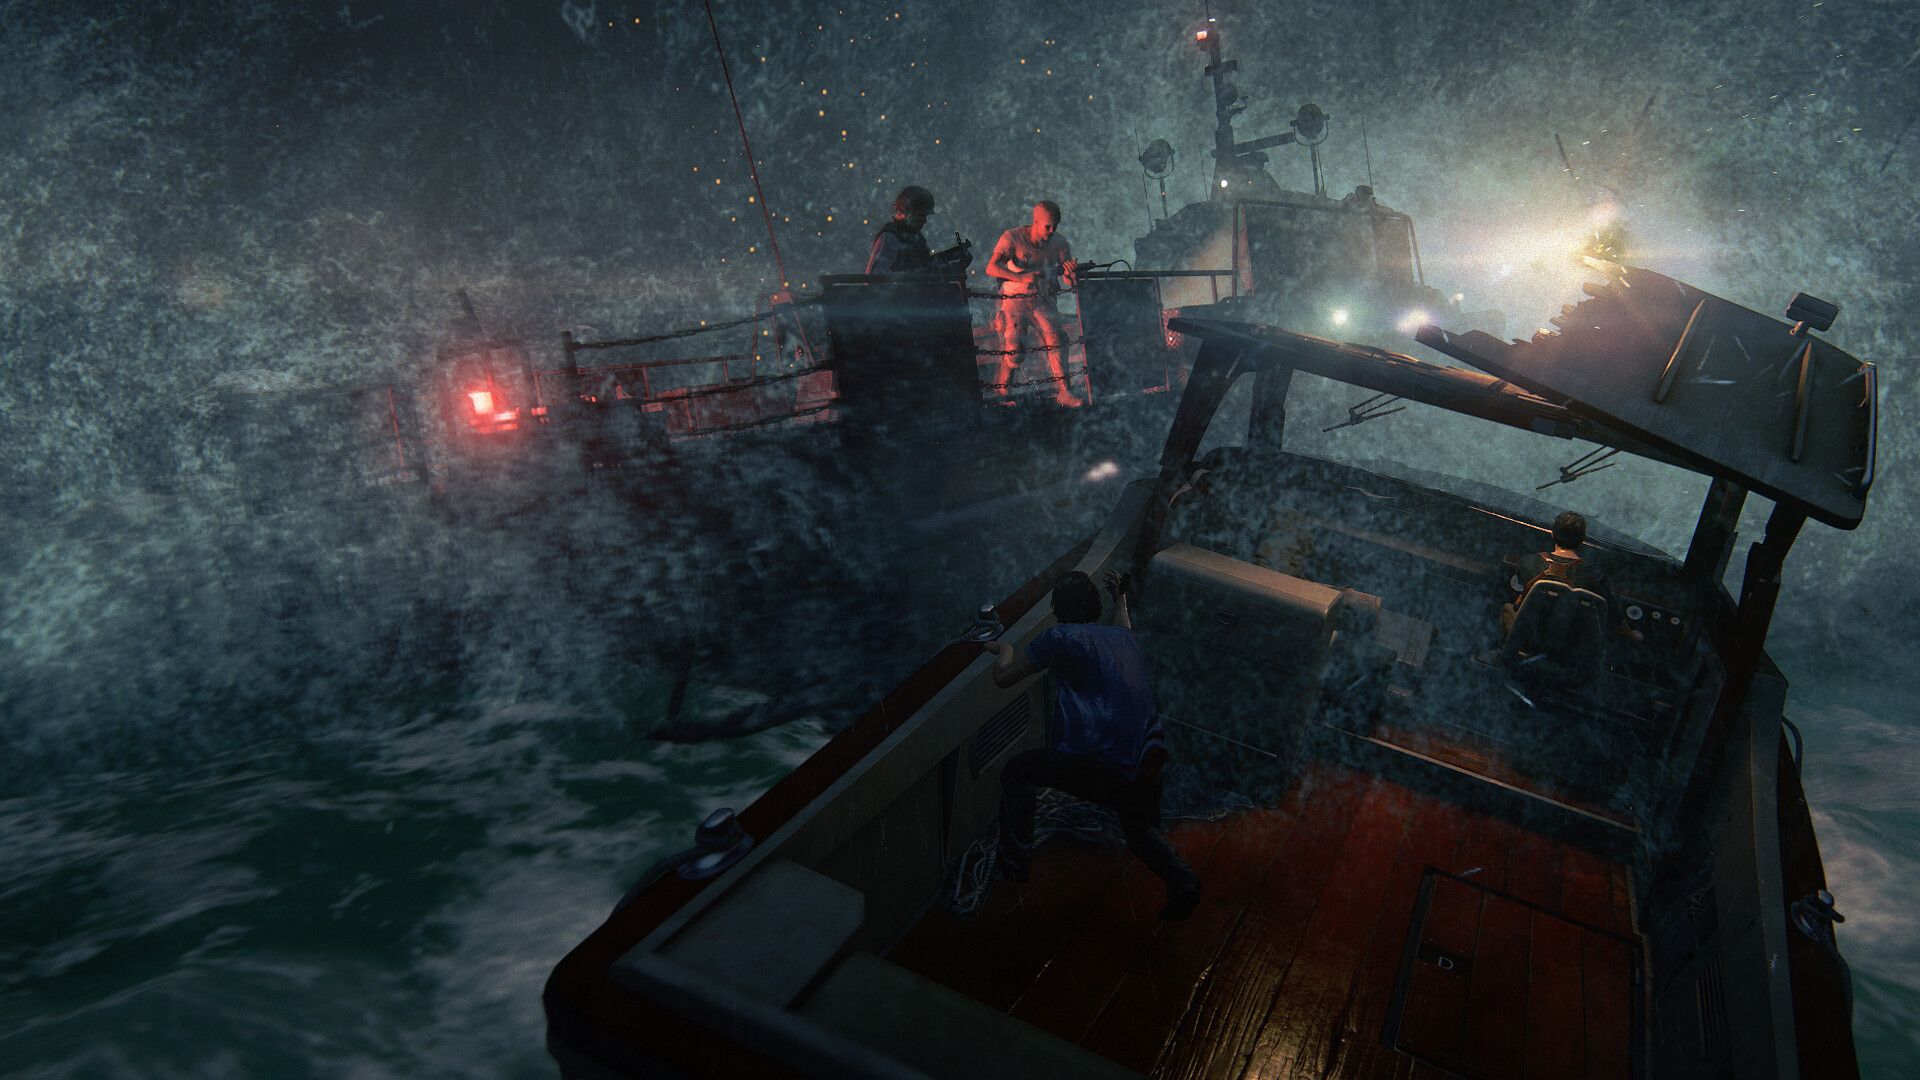 Uncharted 4 boat chase 2